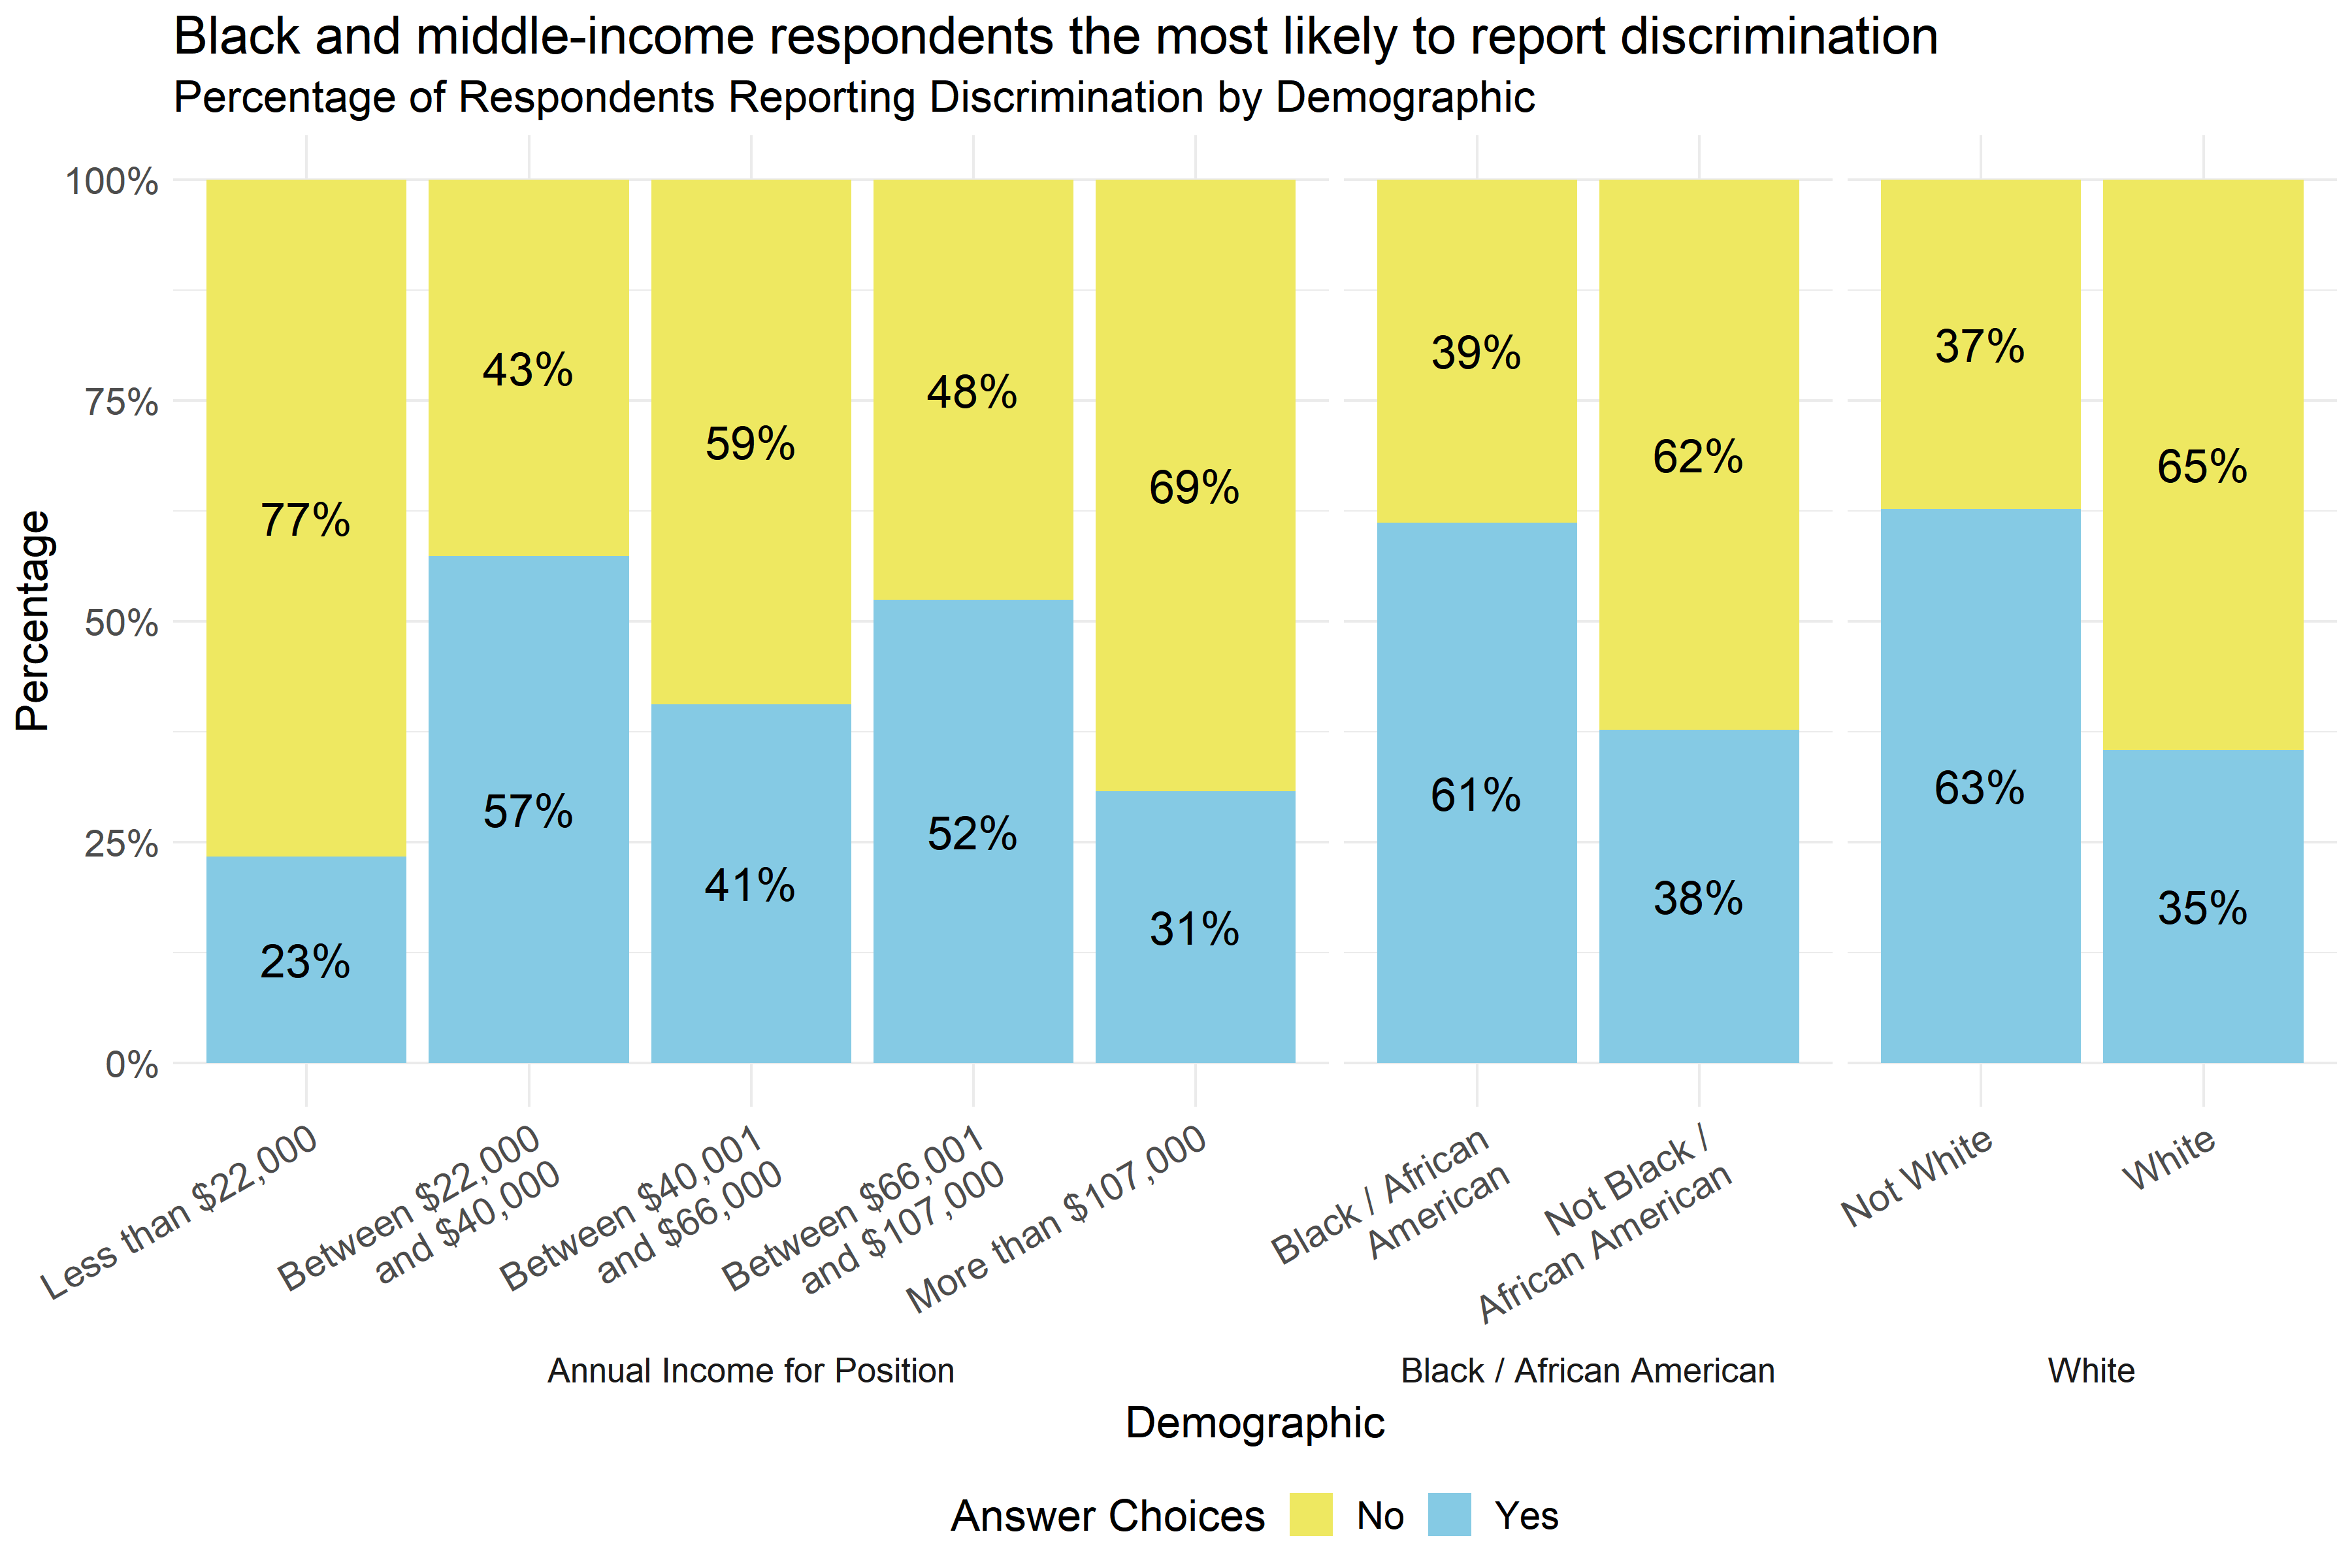 Percentage of respondents reporting discrimination by demographic